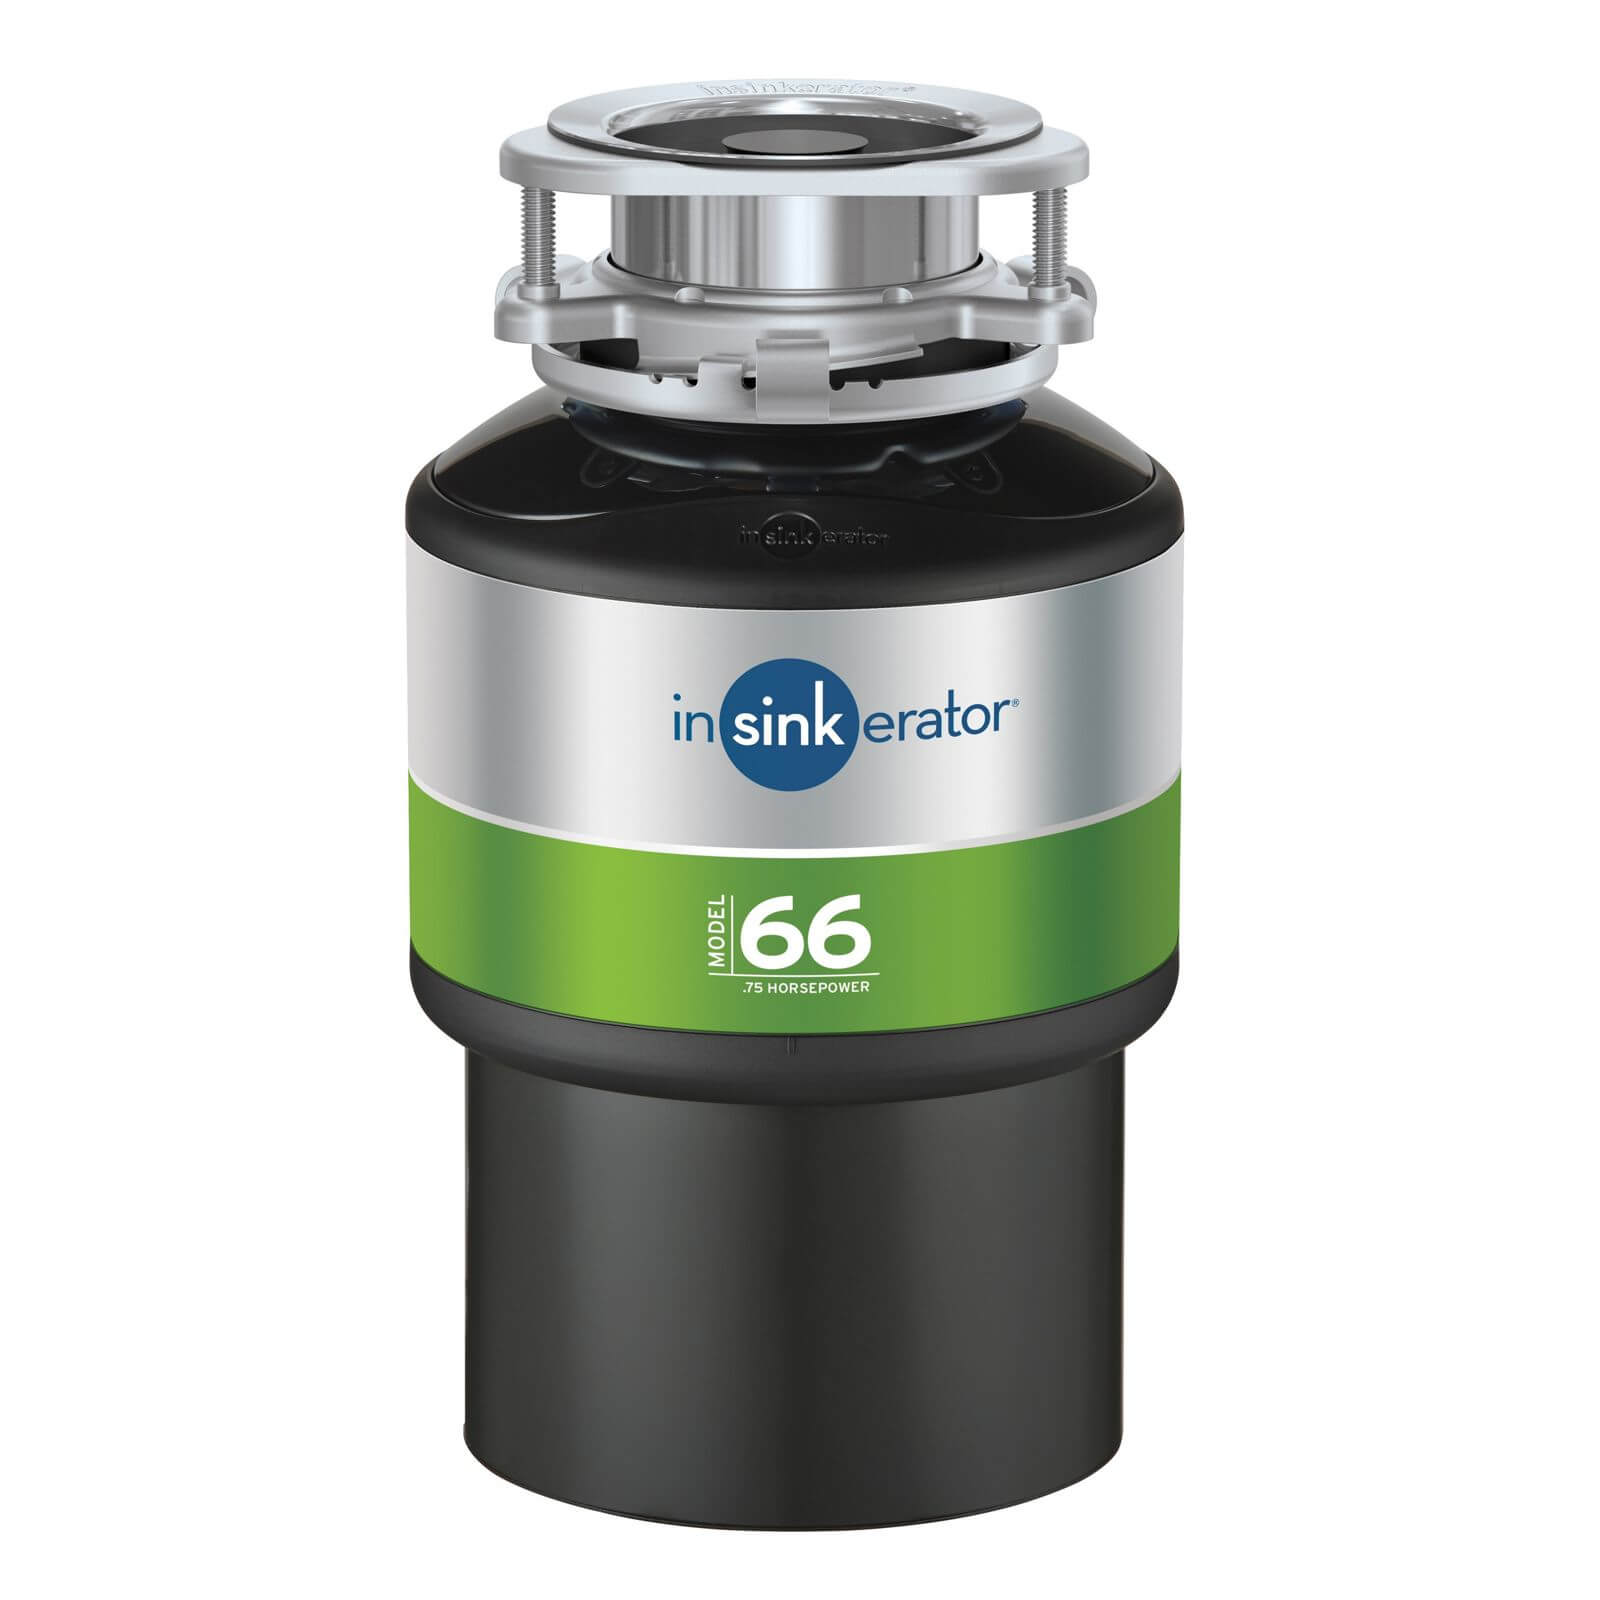 Photo of Insinkerator Model 66 Family Food Waste Disposer